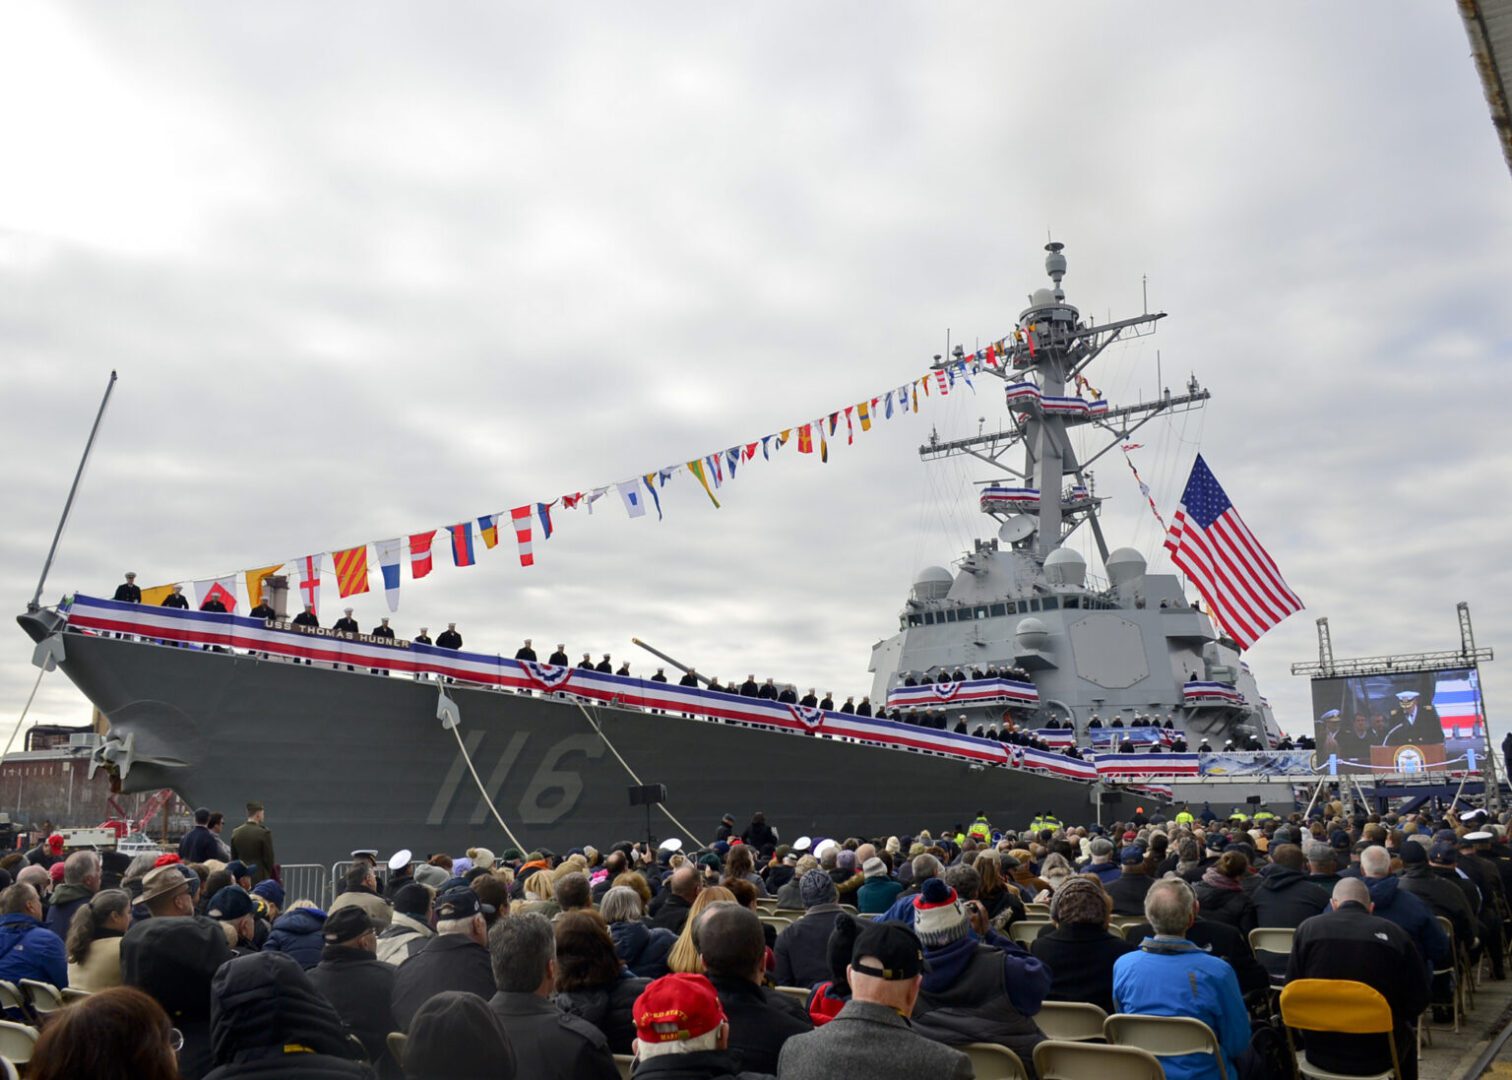 BOSTON (Dec. 1, 2018) Crewmembers of USS Thomas Hudner (DDG 116) man the rails as the ship comes to life during her commissioning ceremony. The guided-missile destroyer is the 66th Arleigh Burke-class destroyer and the first warship named for Capt. Thomas J. Hunder, Jr., who earned the Medal of Honor for the Battle of Chosin Reservoir in the Korean War. (U.S. Navy photo by Airman Olivia K. Manley)